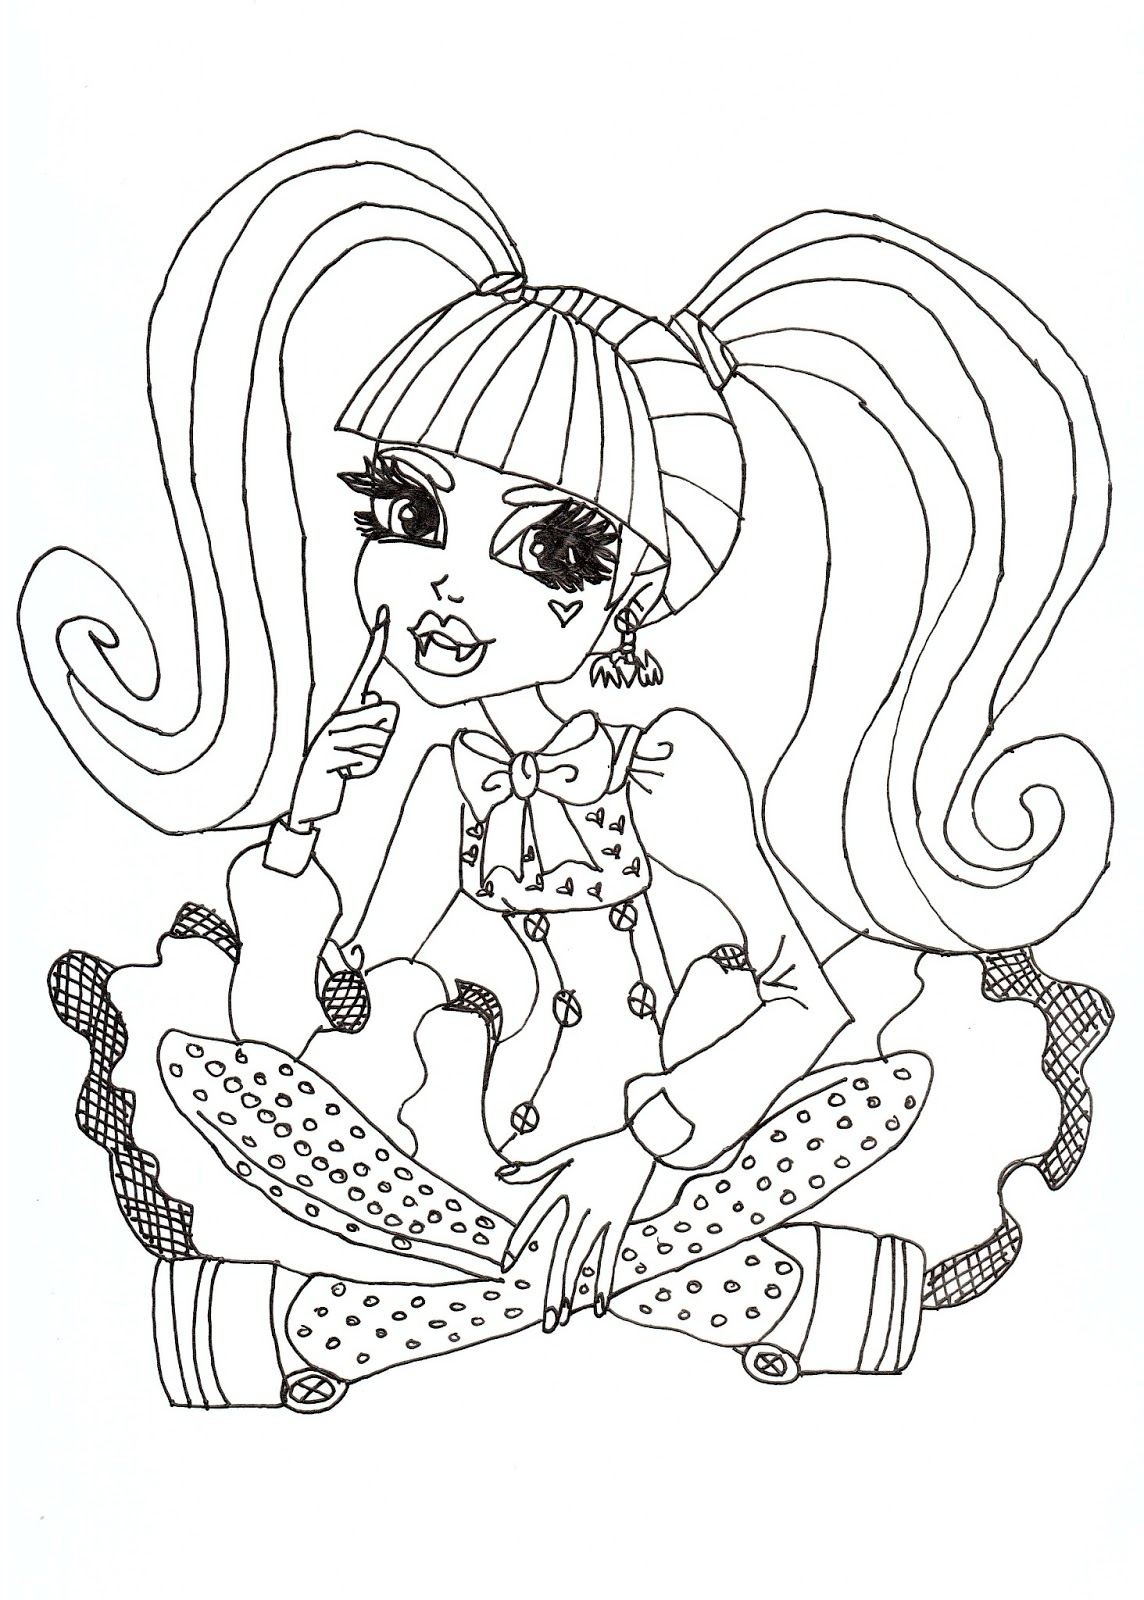 Download Free Printable Monster High Coloring Pages: Monster High Draculaura Free Coloring Sheet